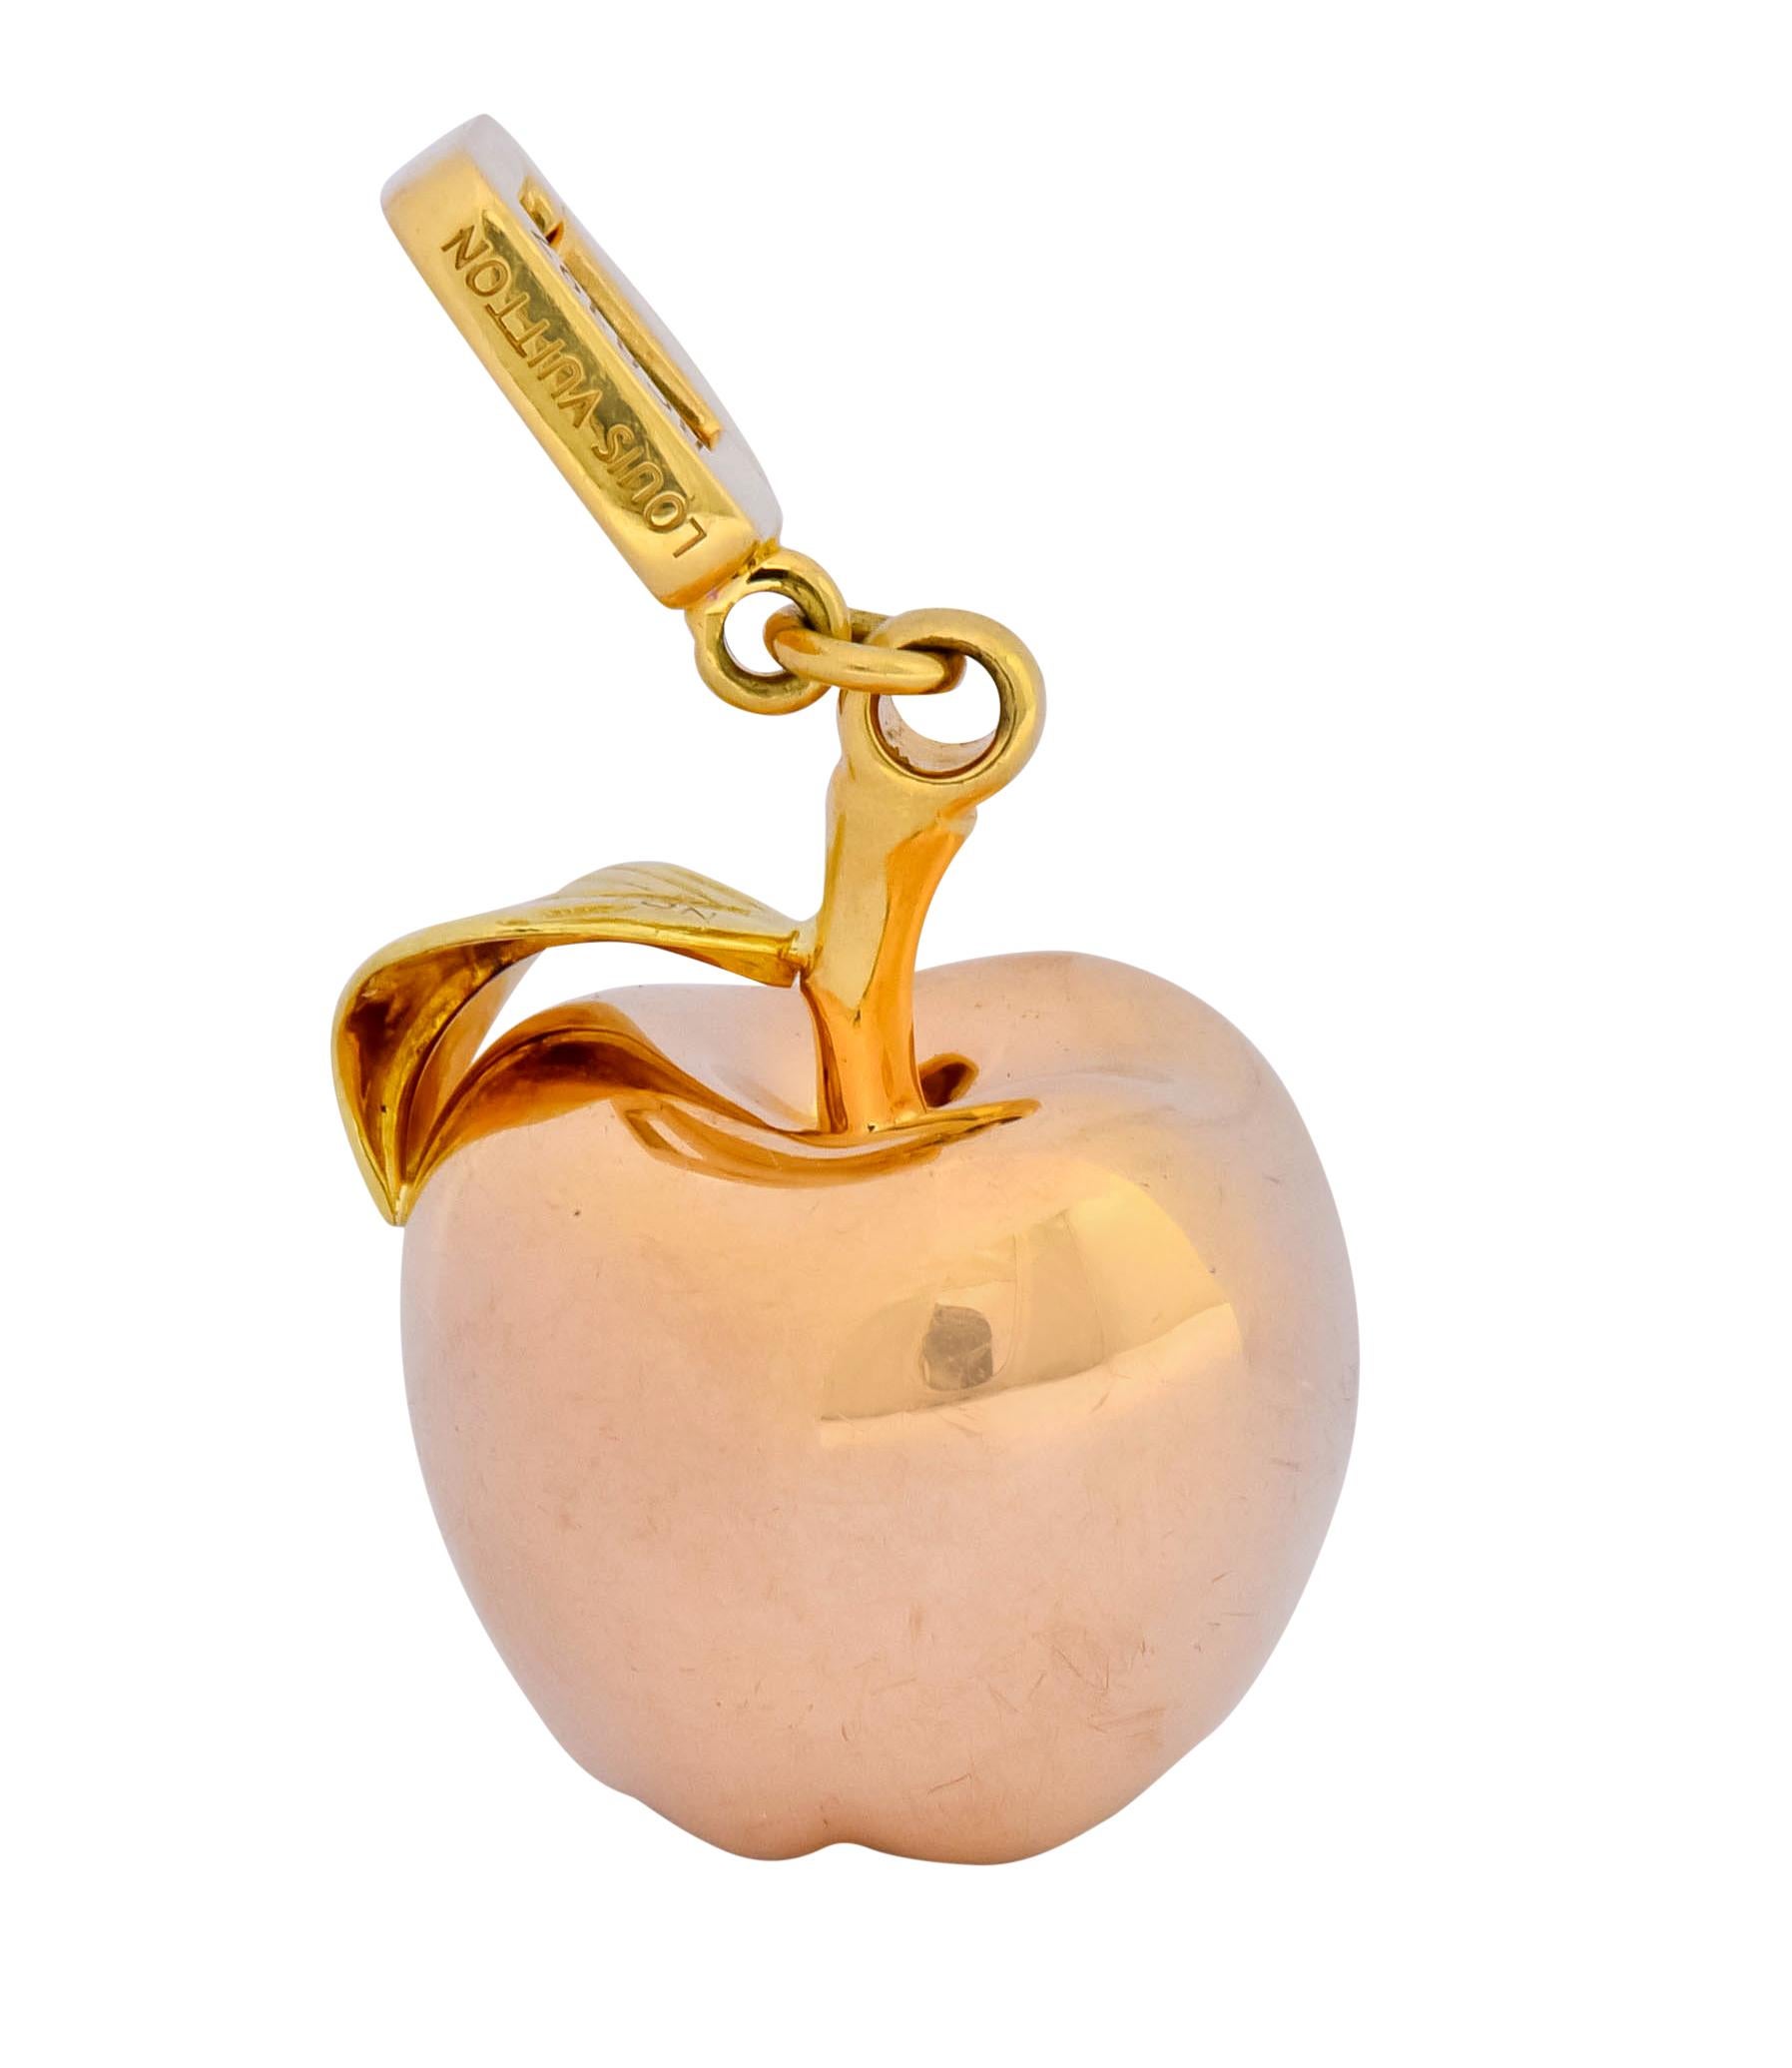 Designed as a high polished solid rose gold apple

Accented with a green gold leaf and yellow gold stem and articulated bale

Bale is fully signed, numbered, and stamped 750 for 18 karat gold

With French assay marks

Circa: 2000's

Pendant length: